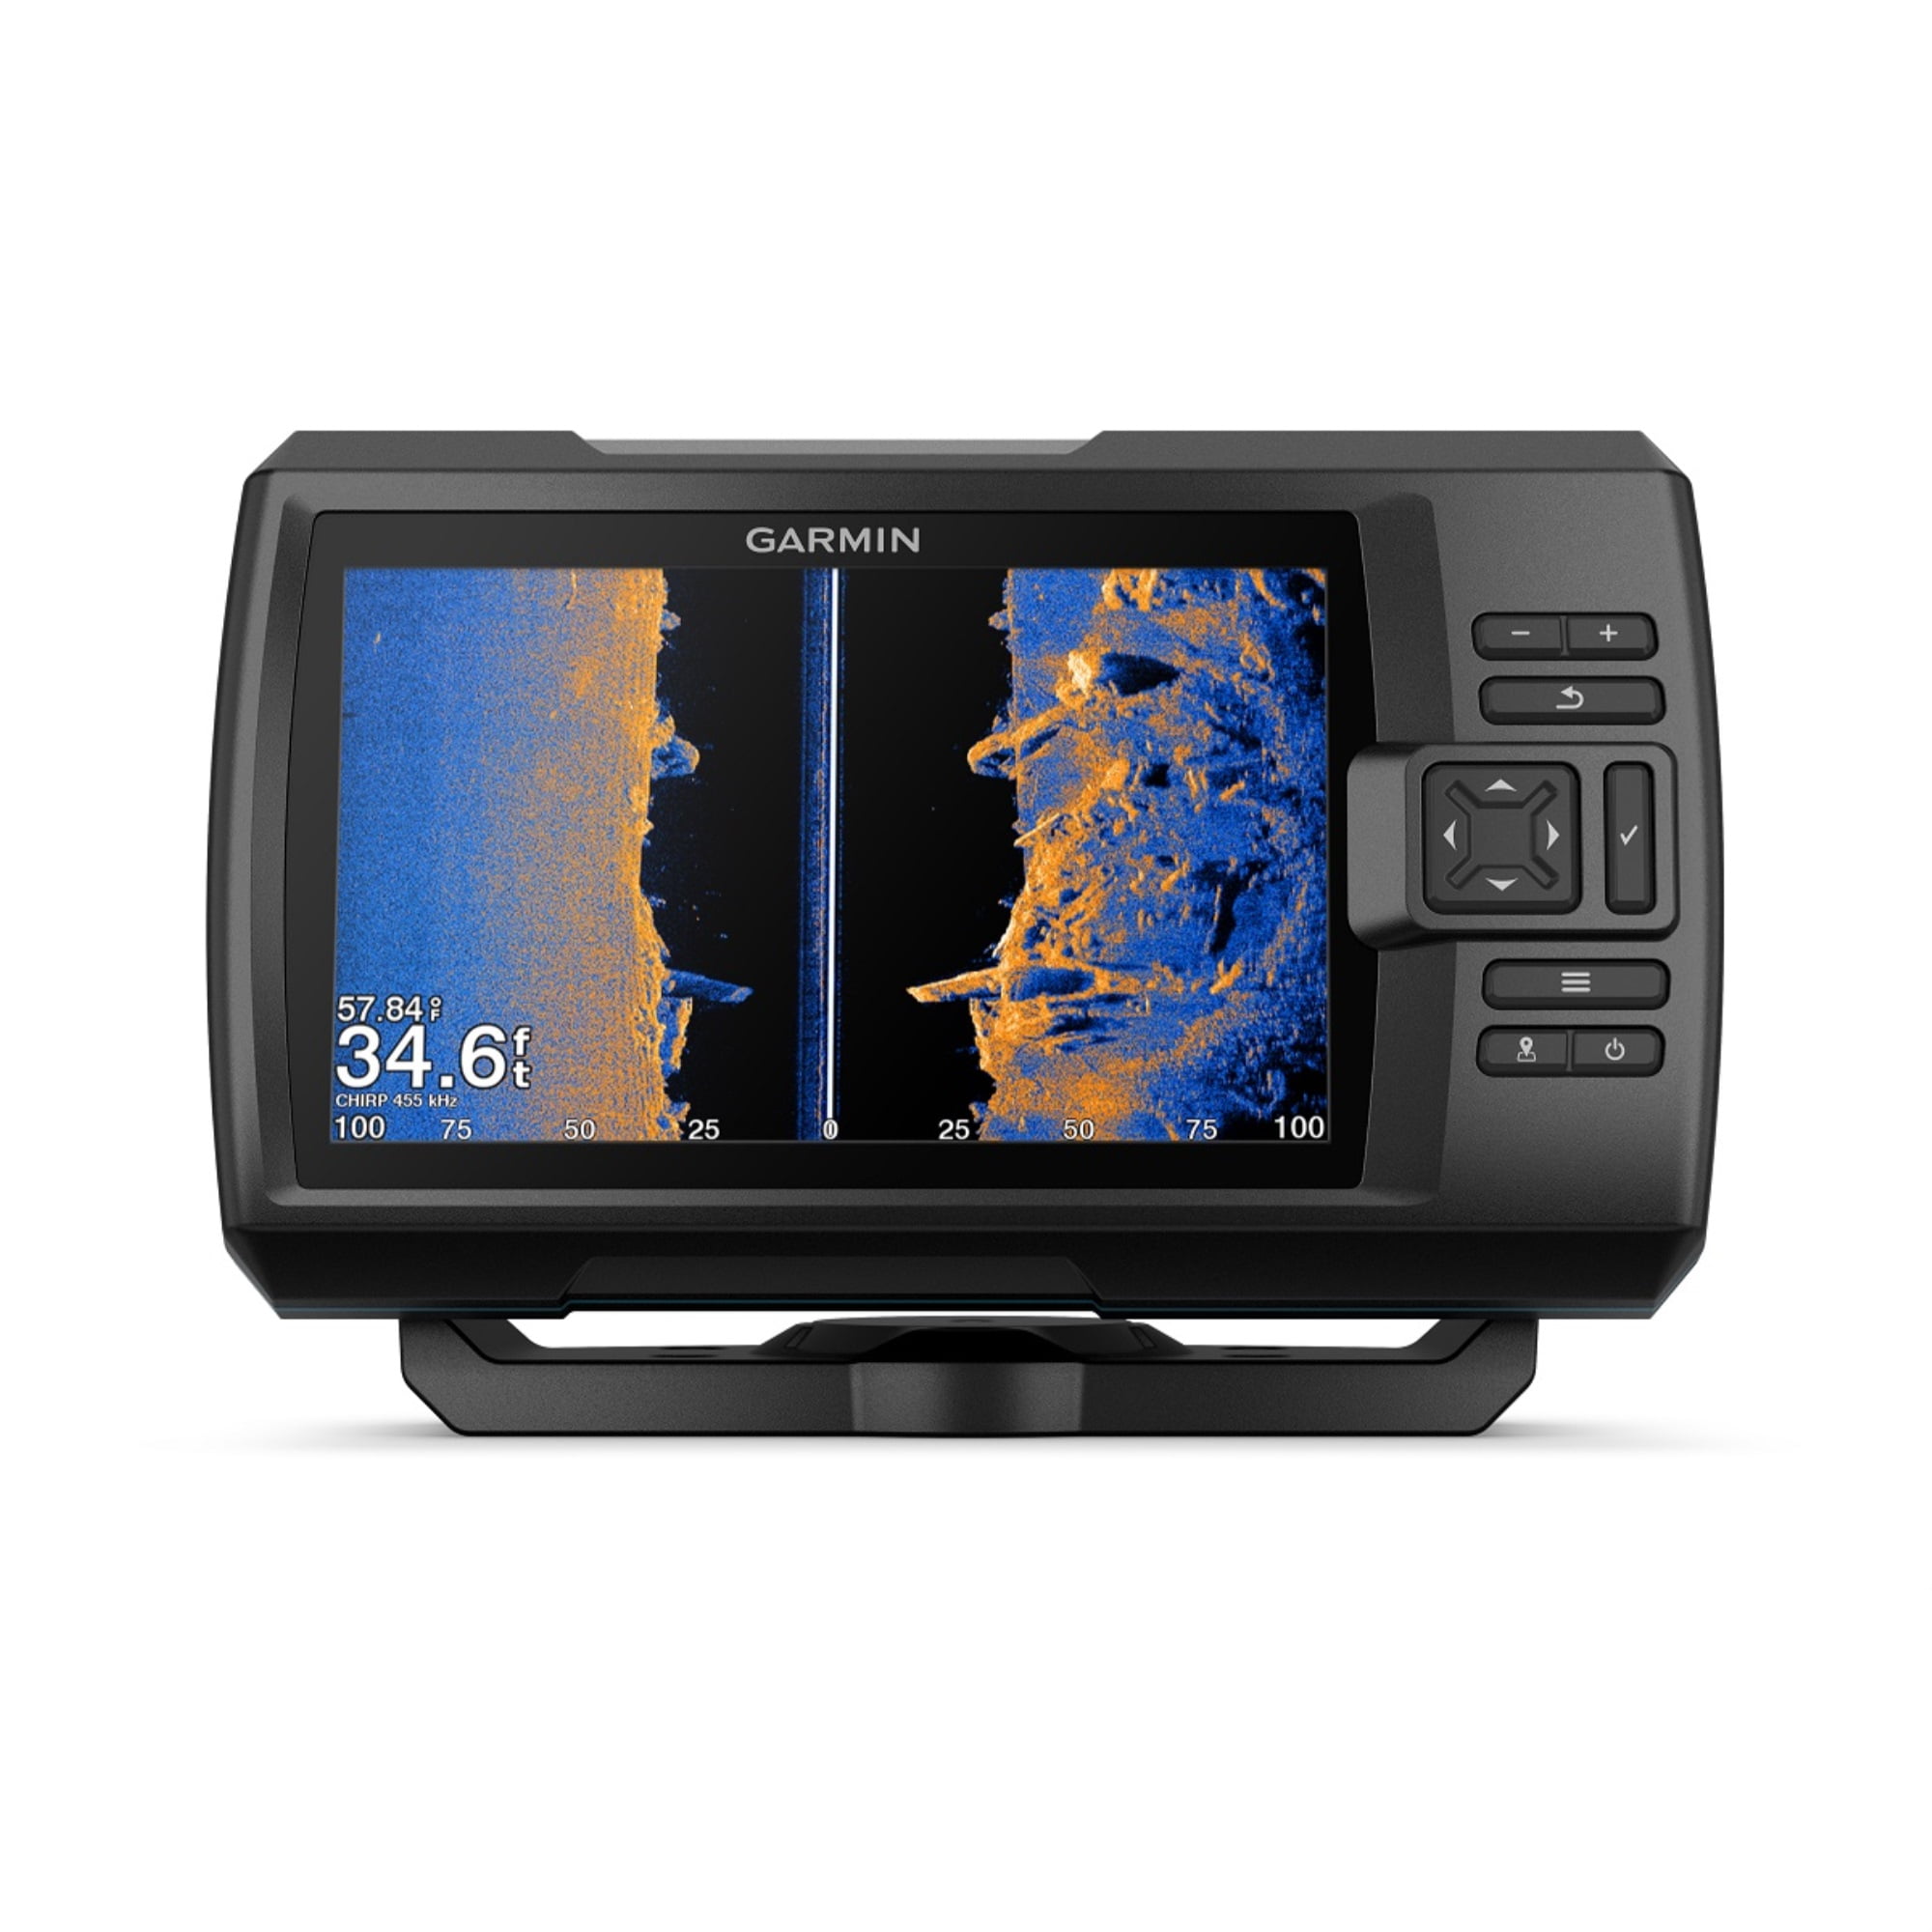 Fish Finder GPS Navigation High CHIRP Auto Tuning Sonar Lowrance HOOK2 4x for sale online 